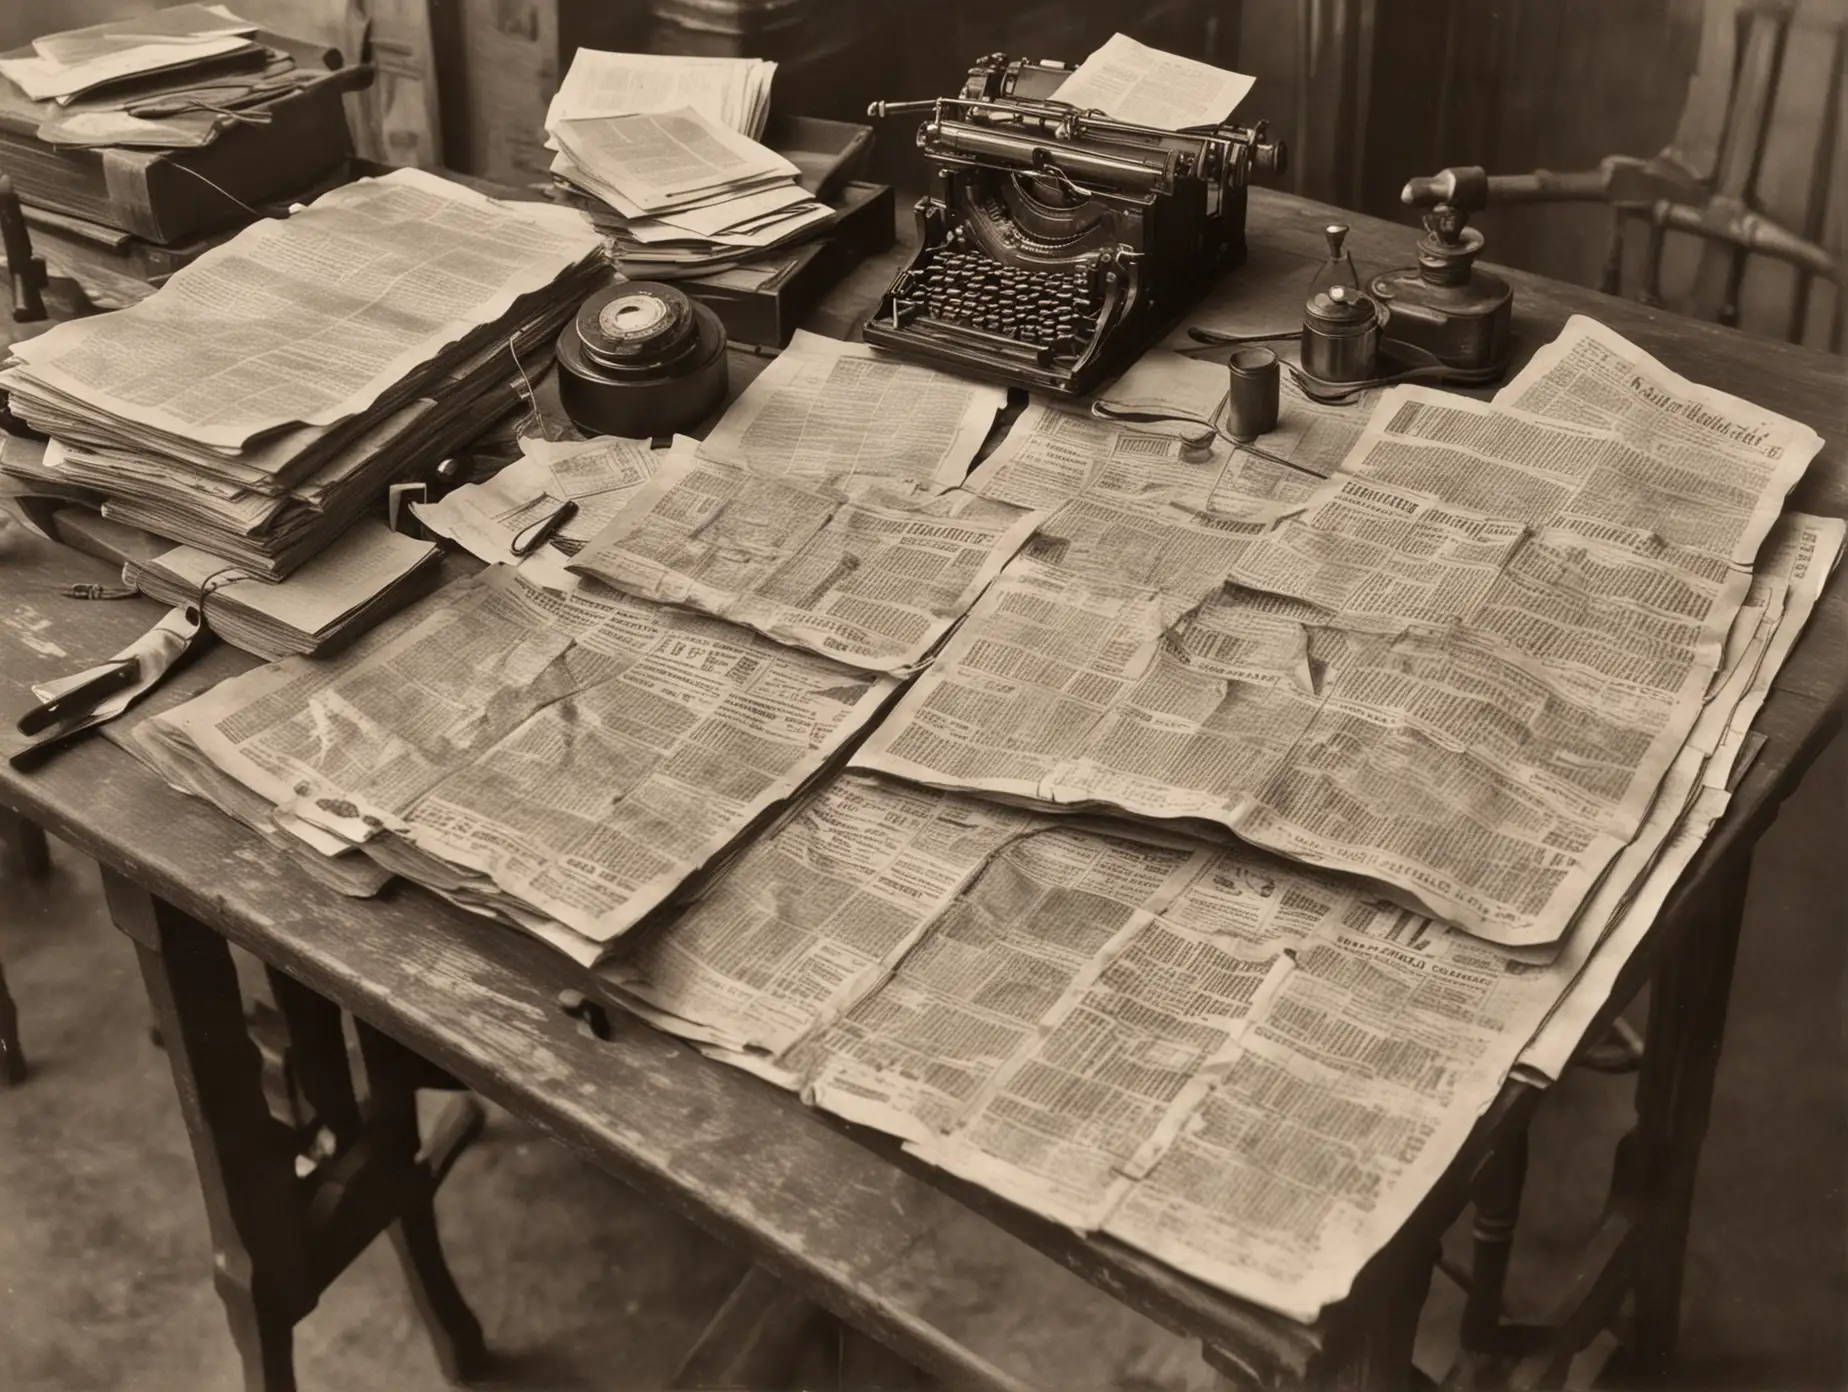 Vintage Newspaper Office Without People Nostalgic 1900s Setting